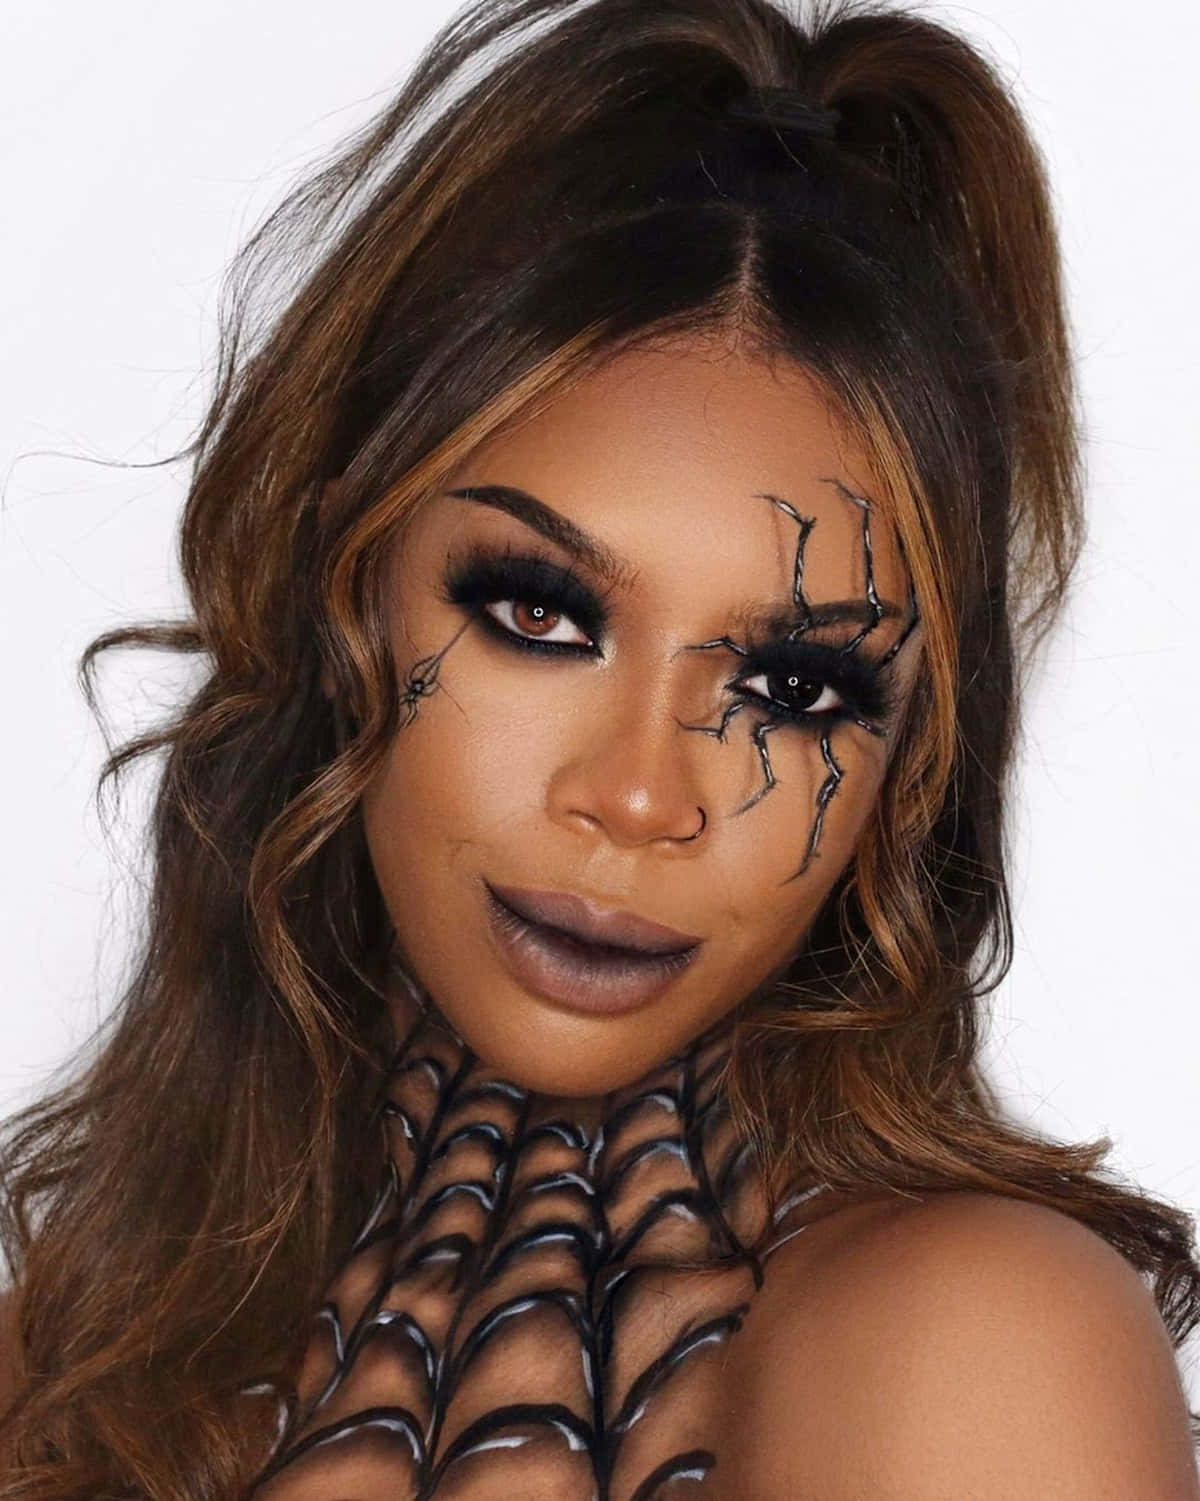 "Get spooky this Halloween with this creative makeup look!" Wallpaper